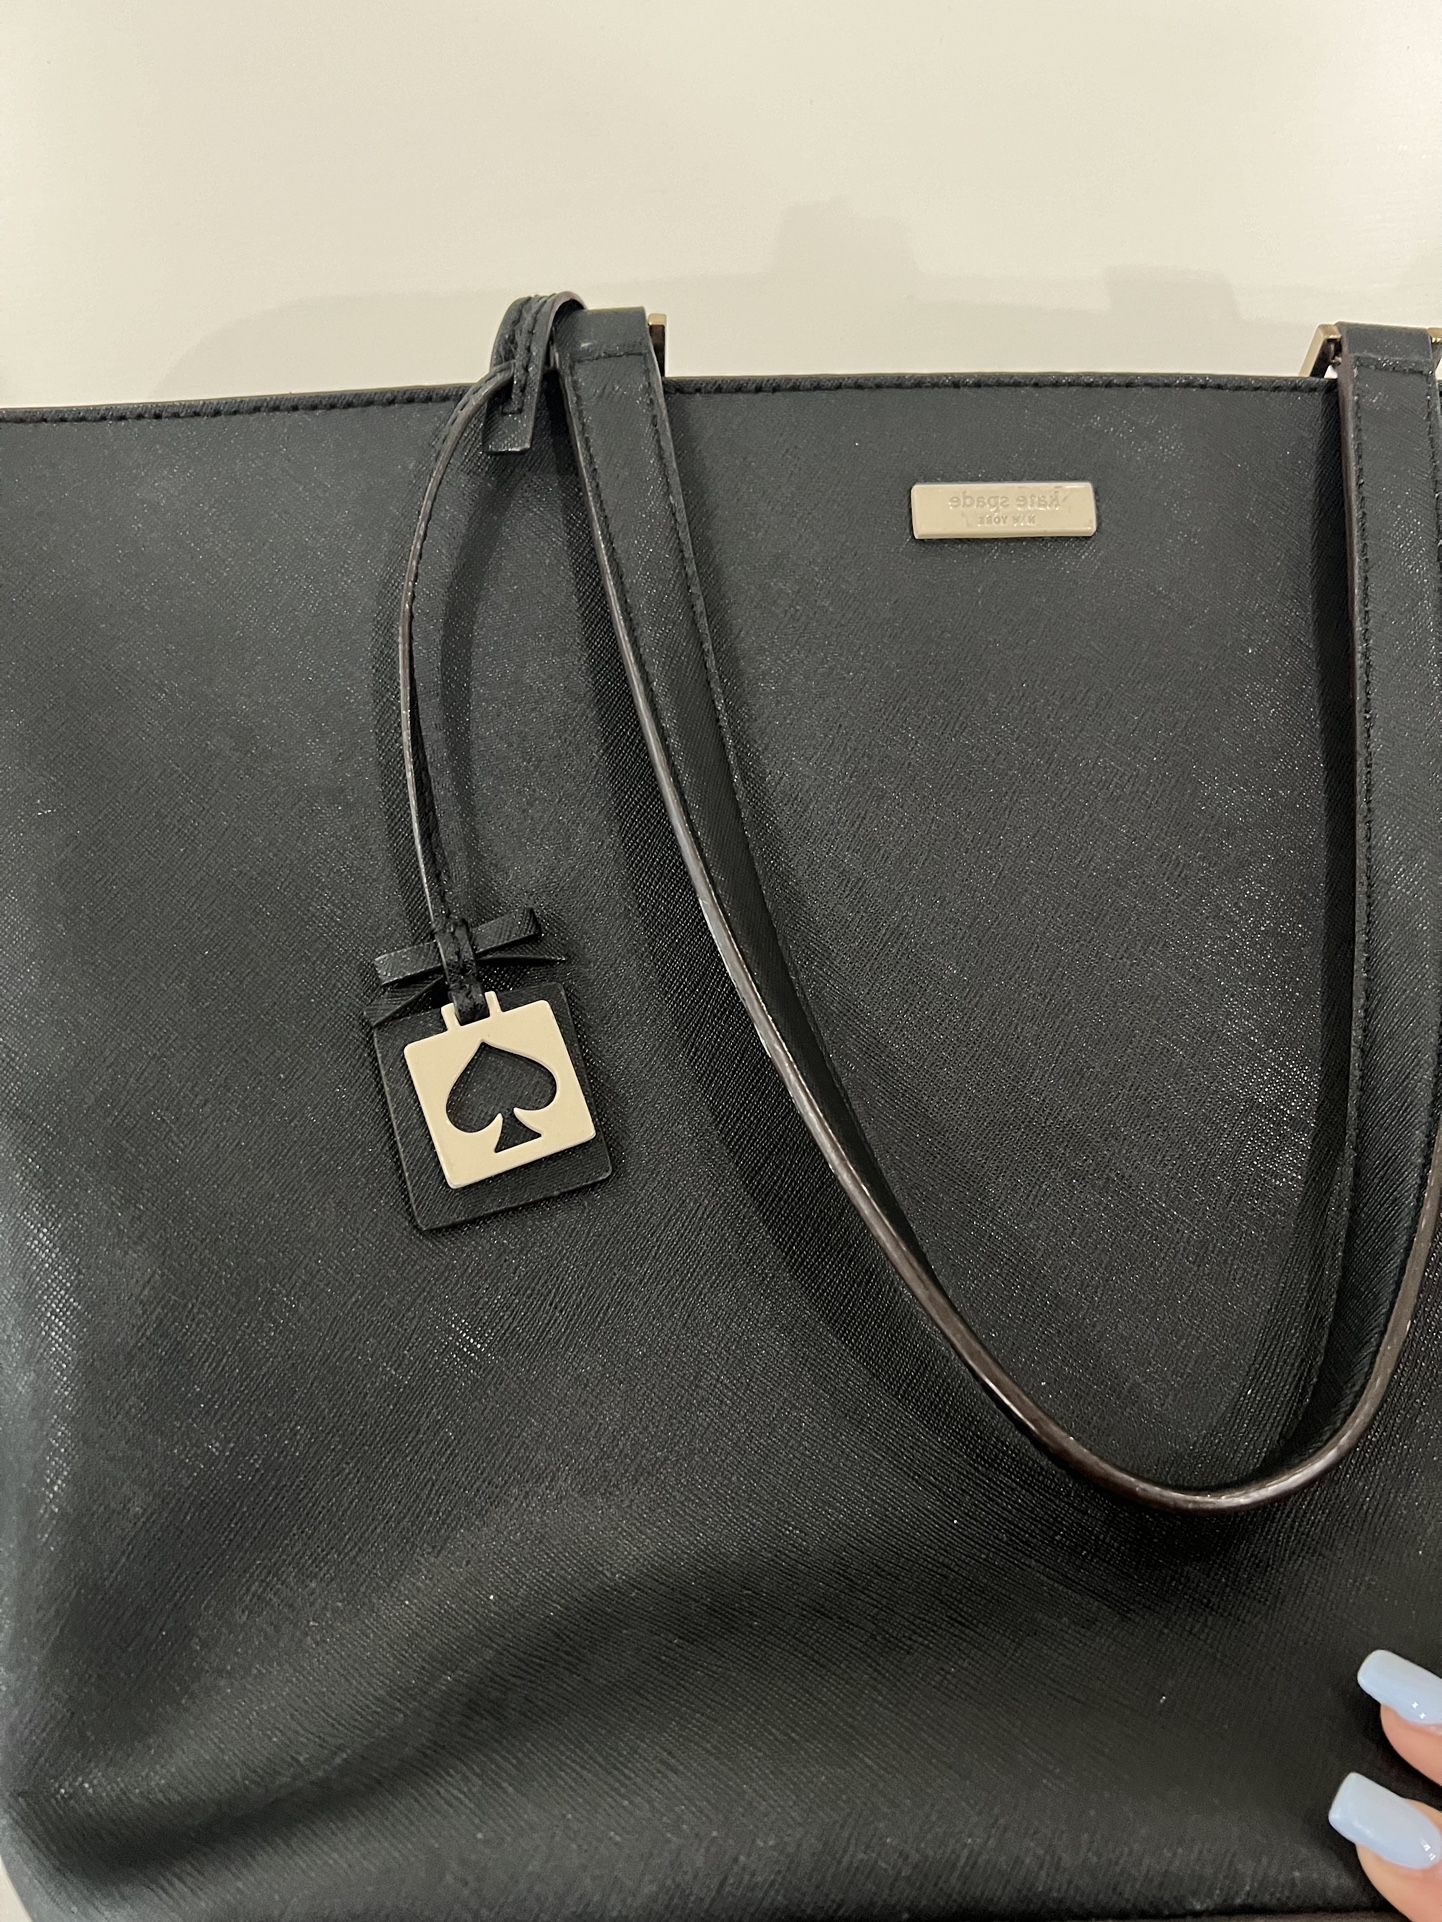 Kate Spade Large tote Bag - Good condition